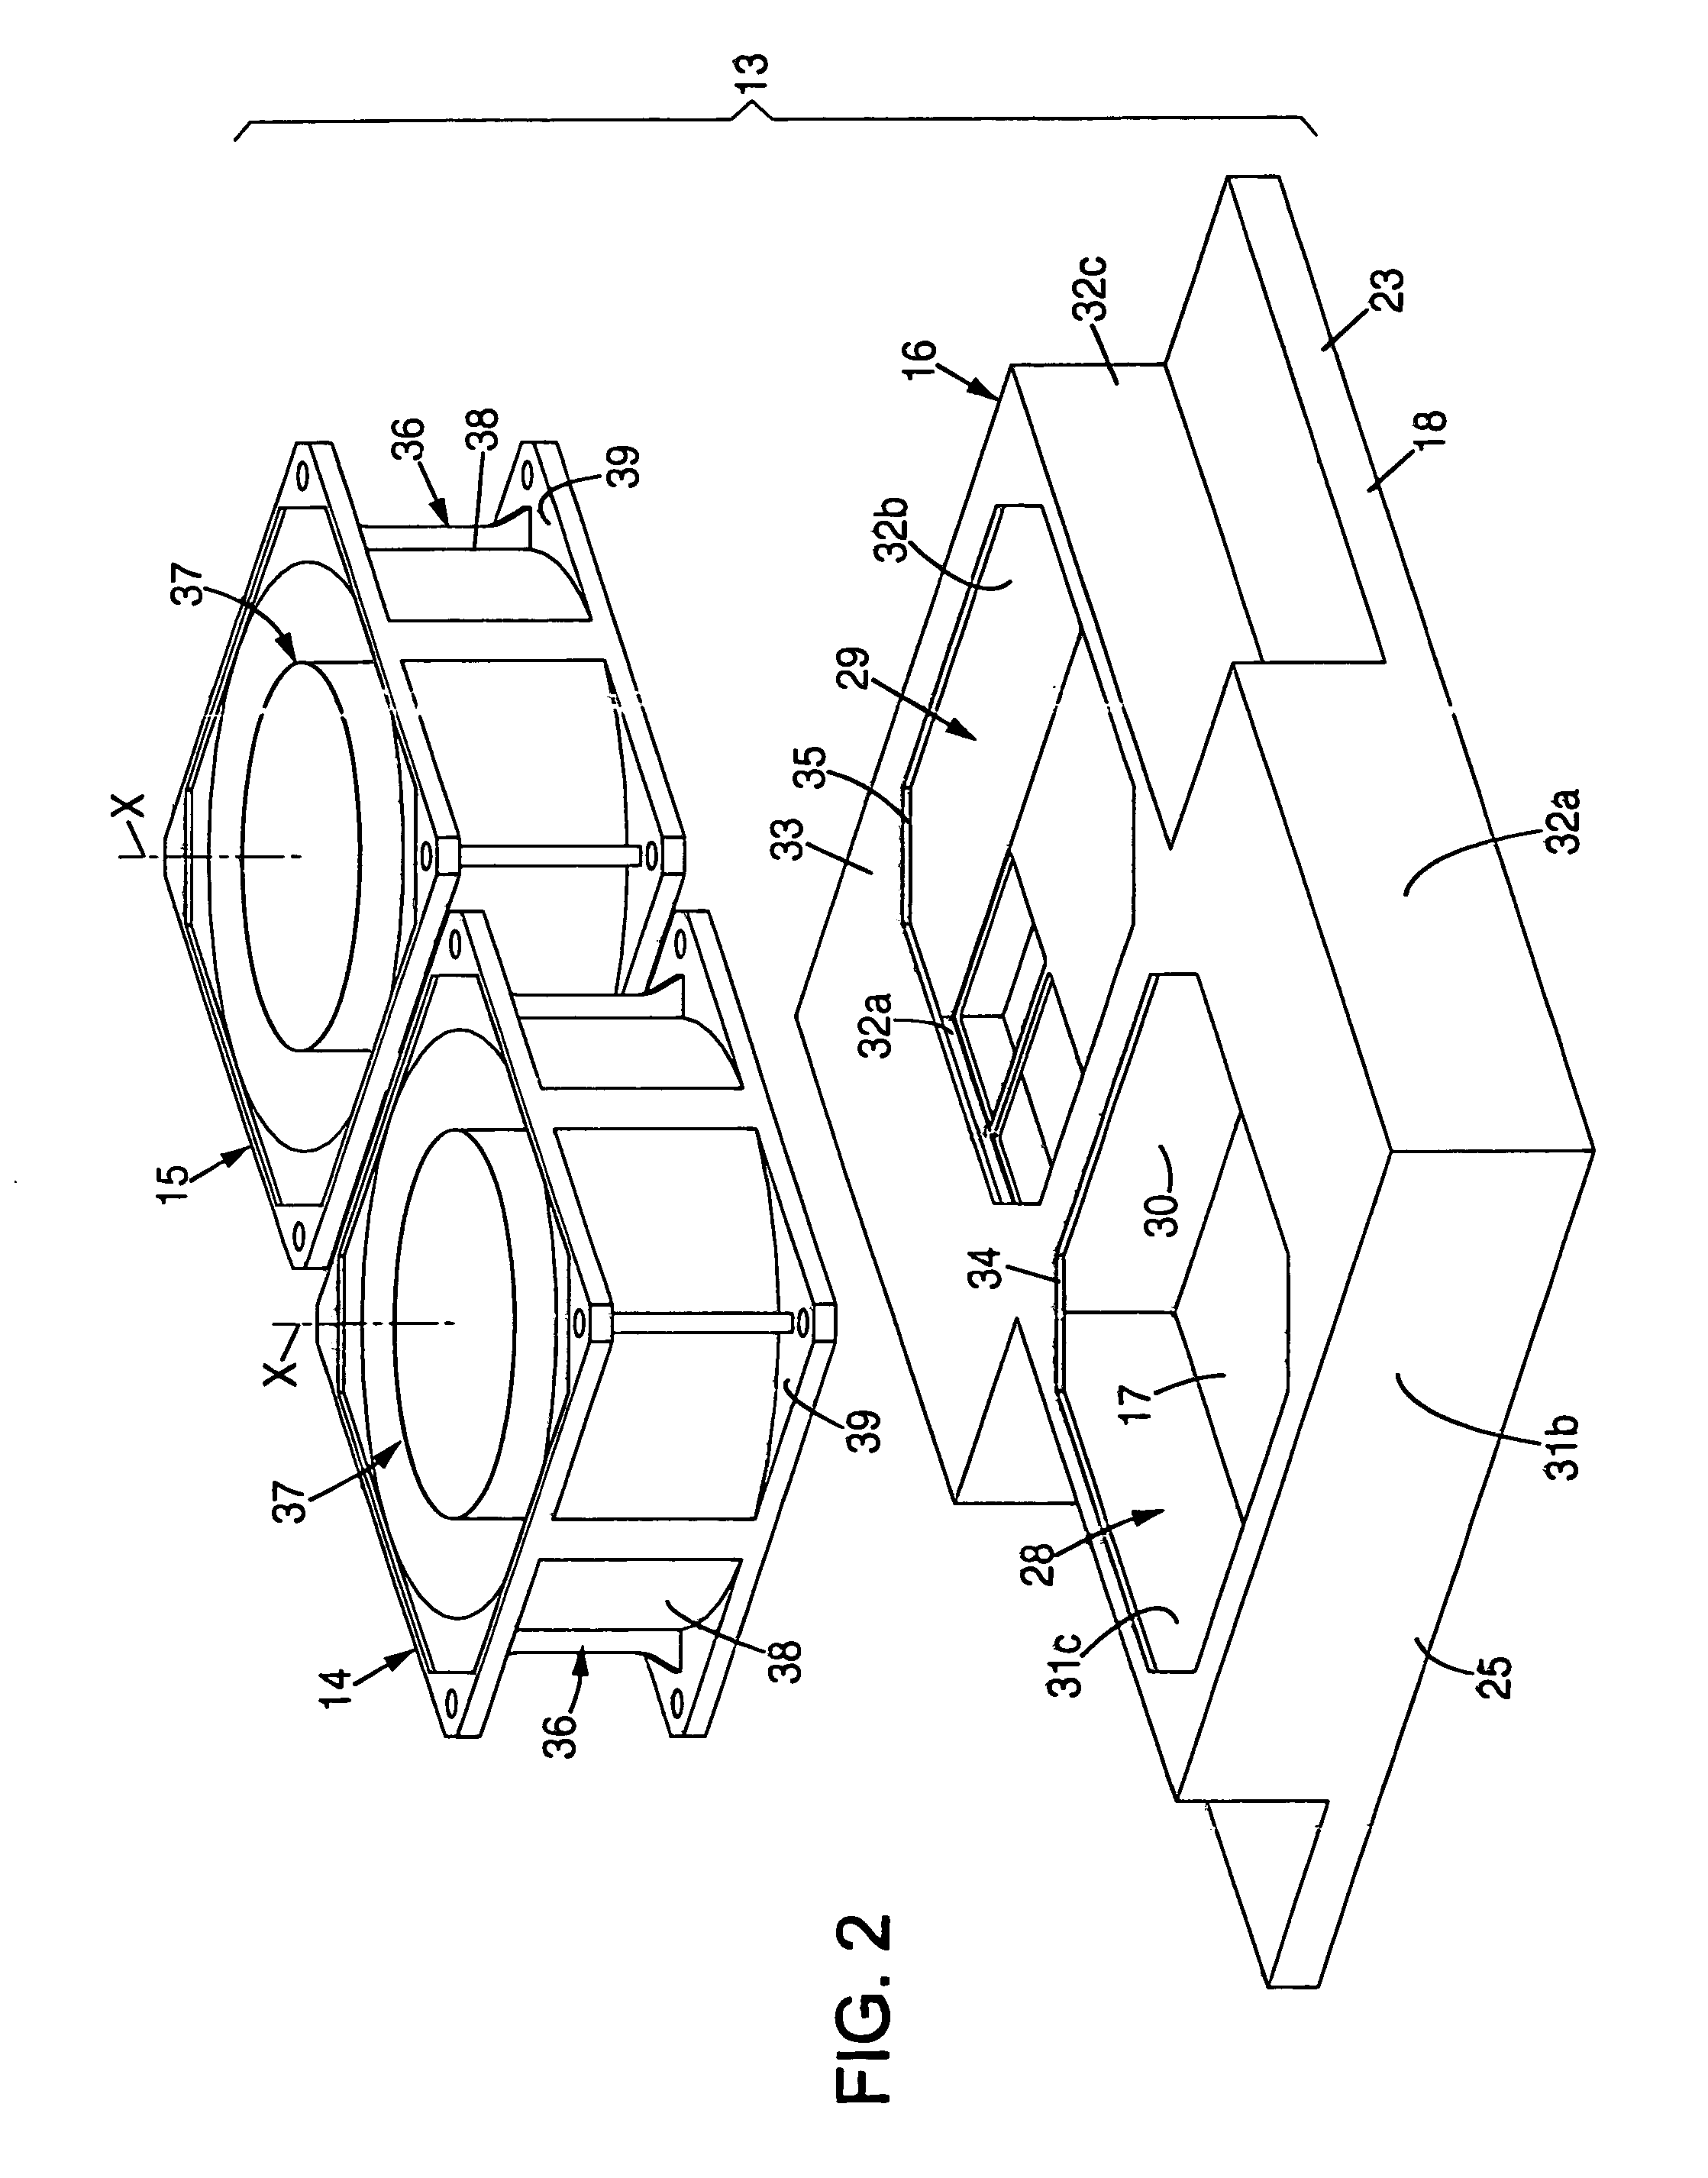 Ventilation system for electrical of electronic equipment